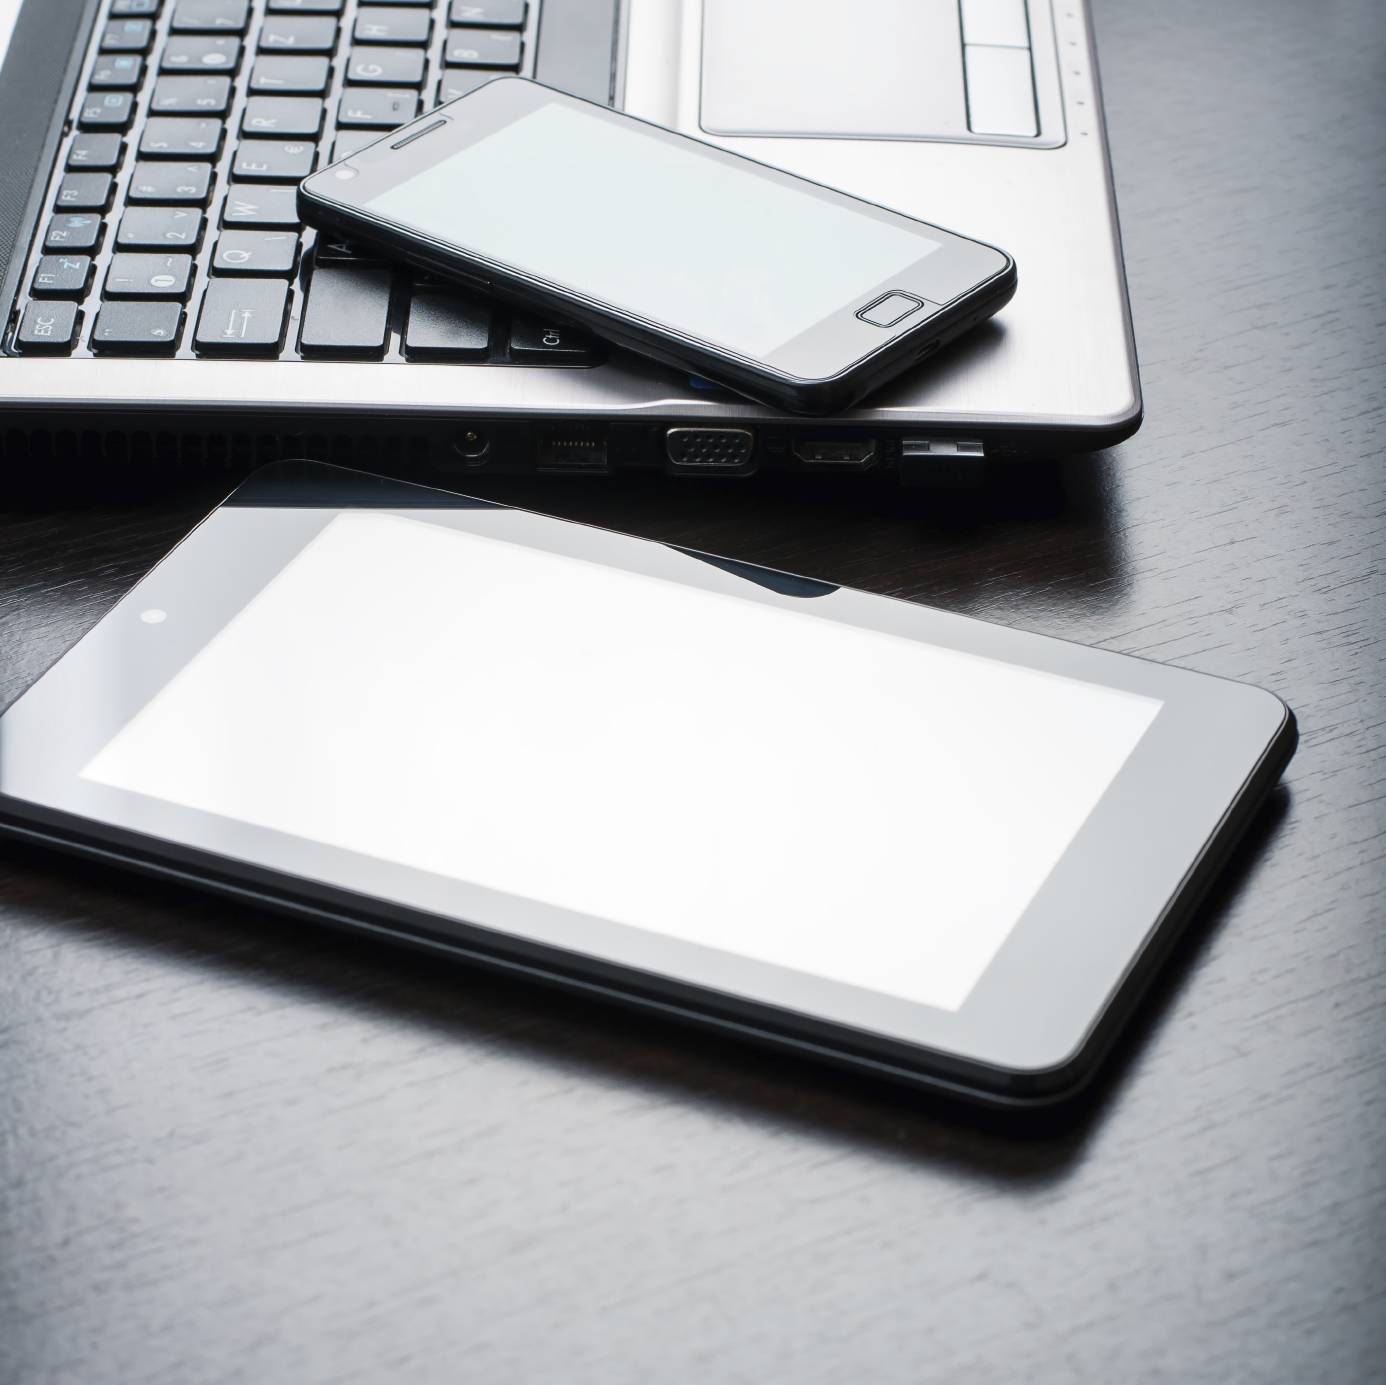 stock image - laptop, smartphone and tablet